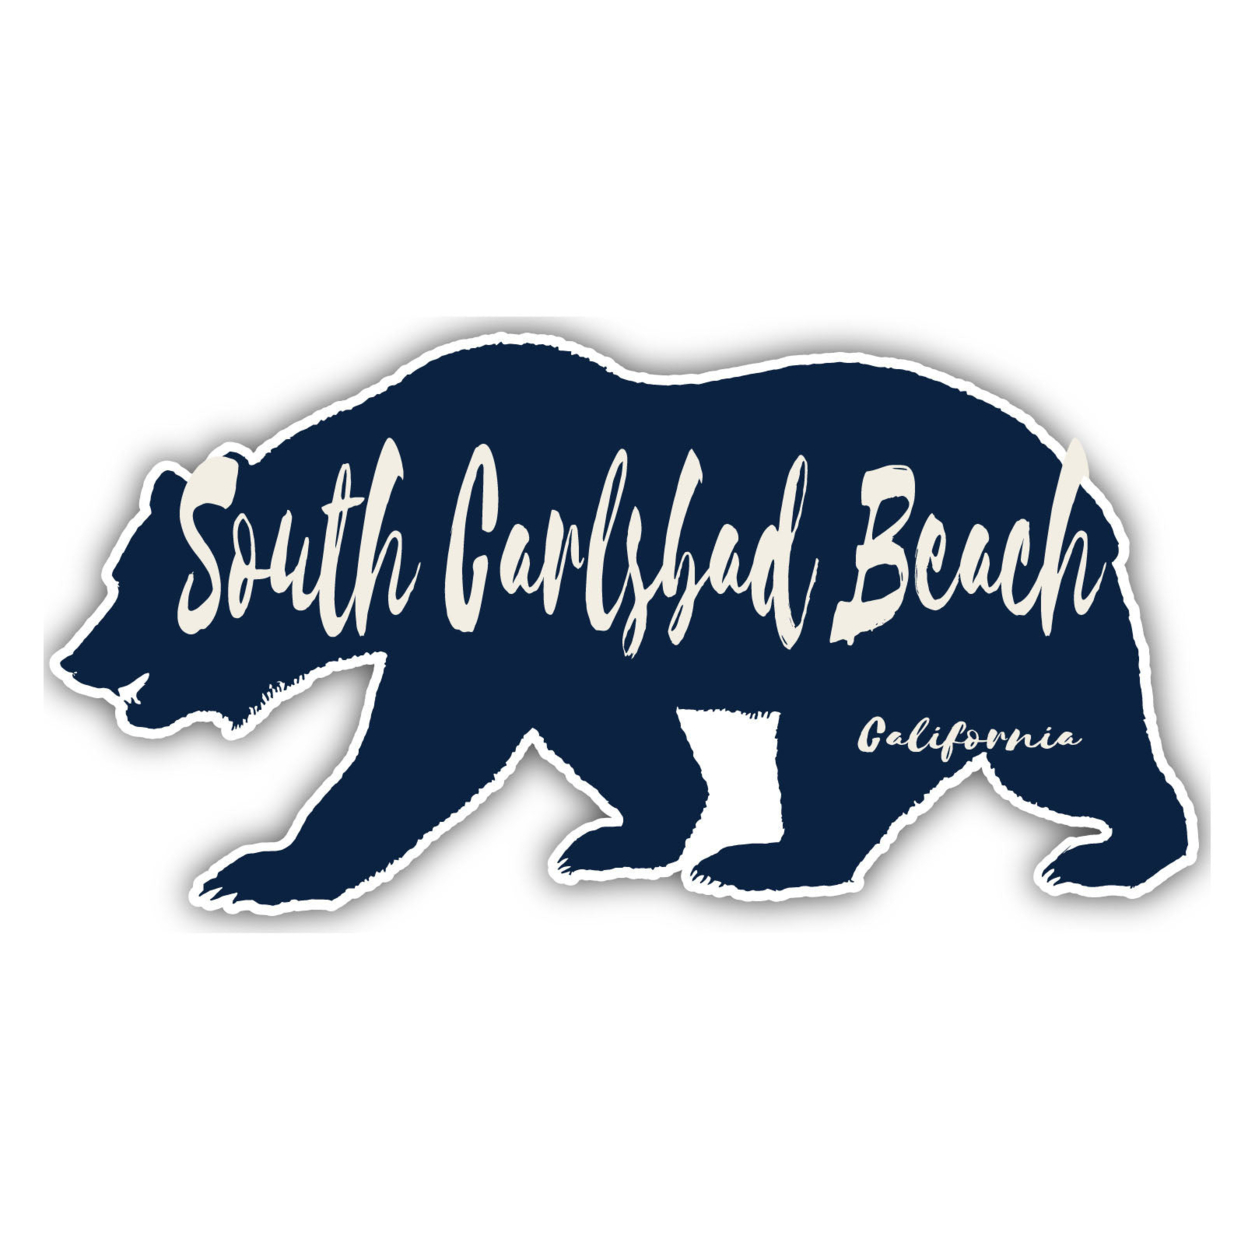 South Carlsbad Beach California Souvenir Decorative Stickers (Choose Theme And Size) - Single Unit, 4-Inch, Camp Life